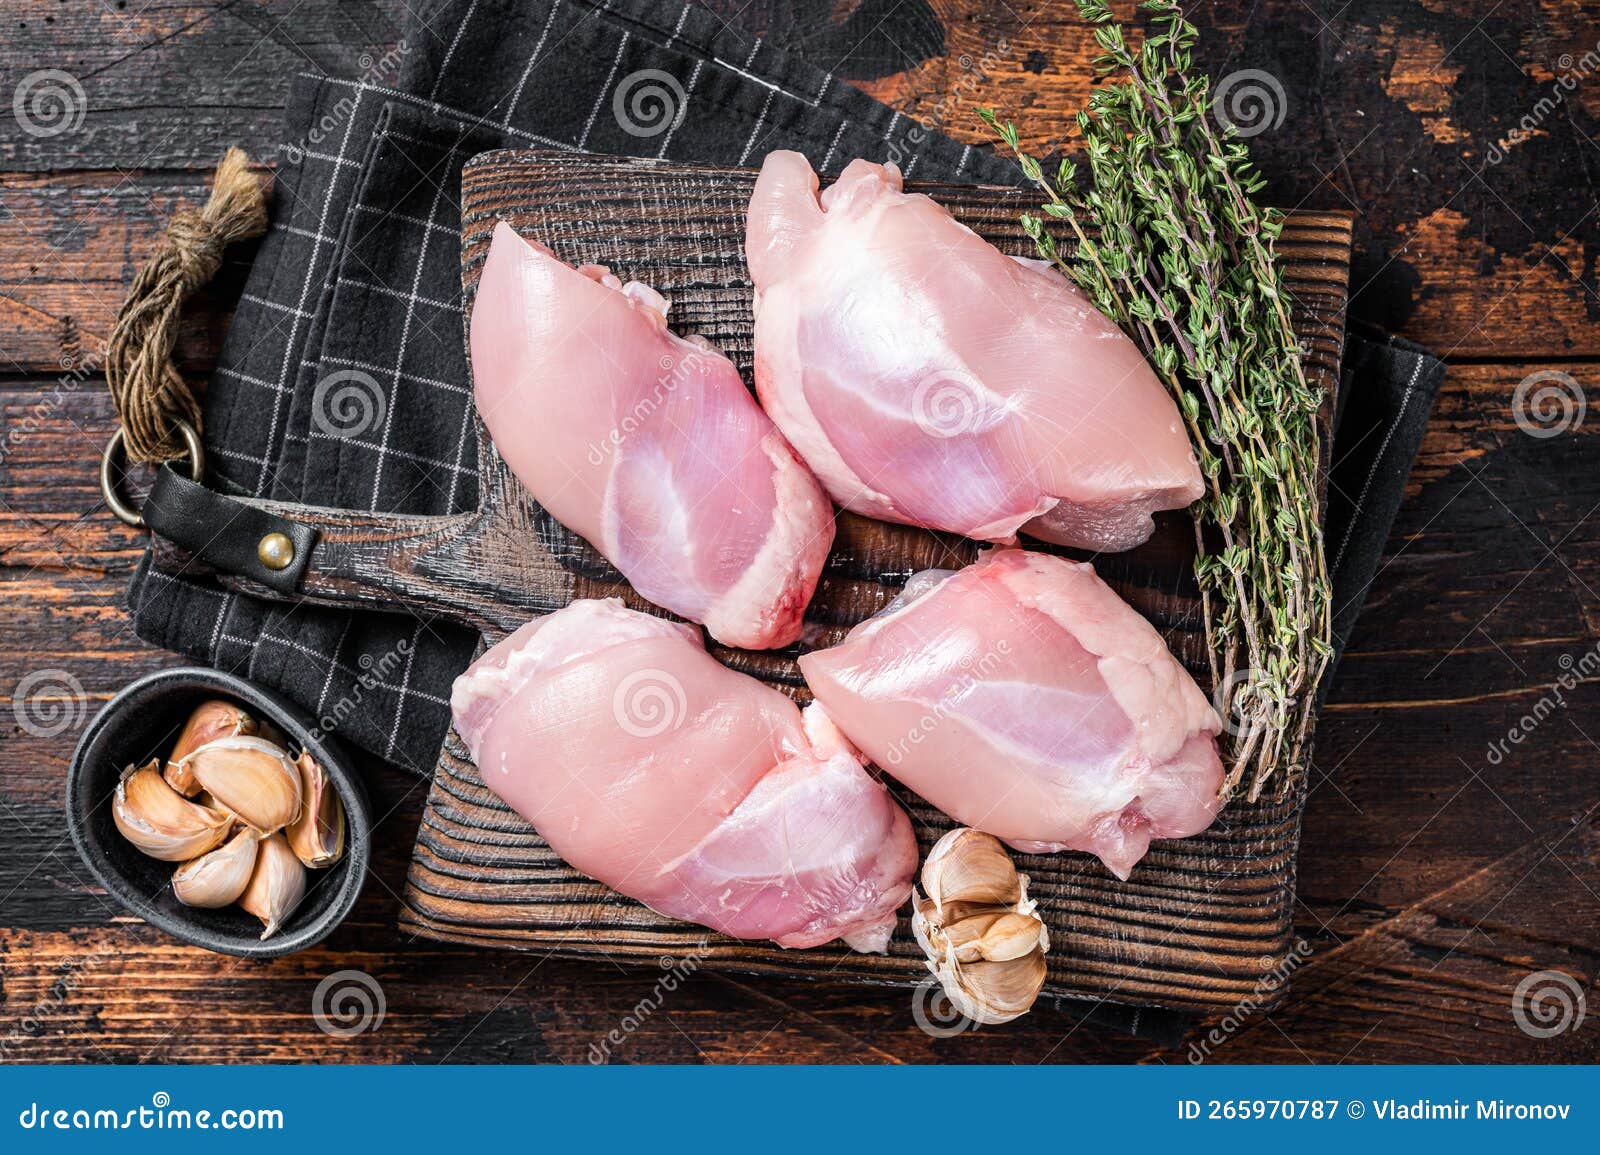 Chicken Thigh Fillet, Raw Boneless and Skinless Meat on a Cutting Board ...